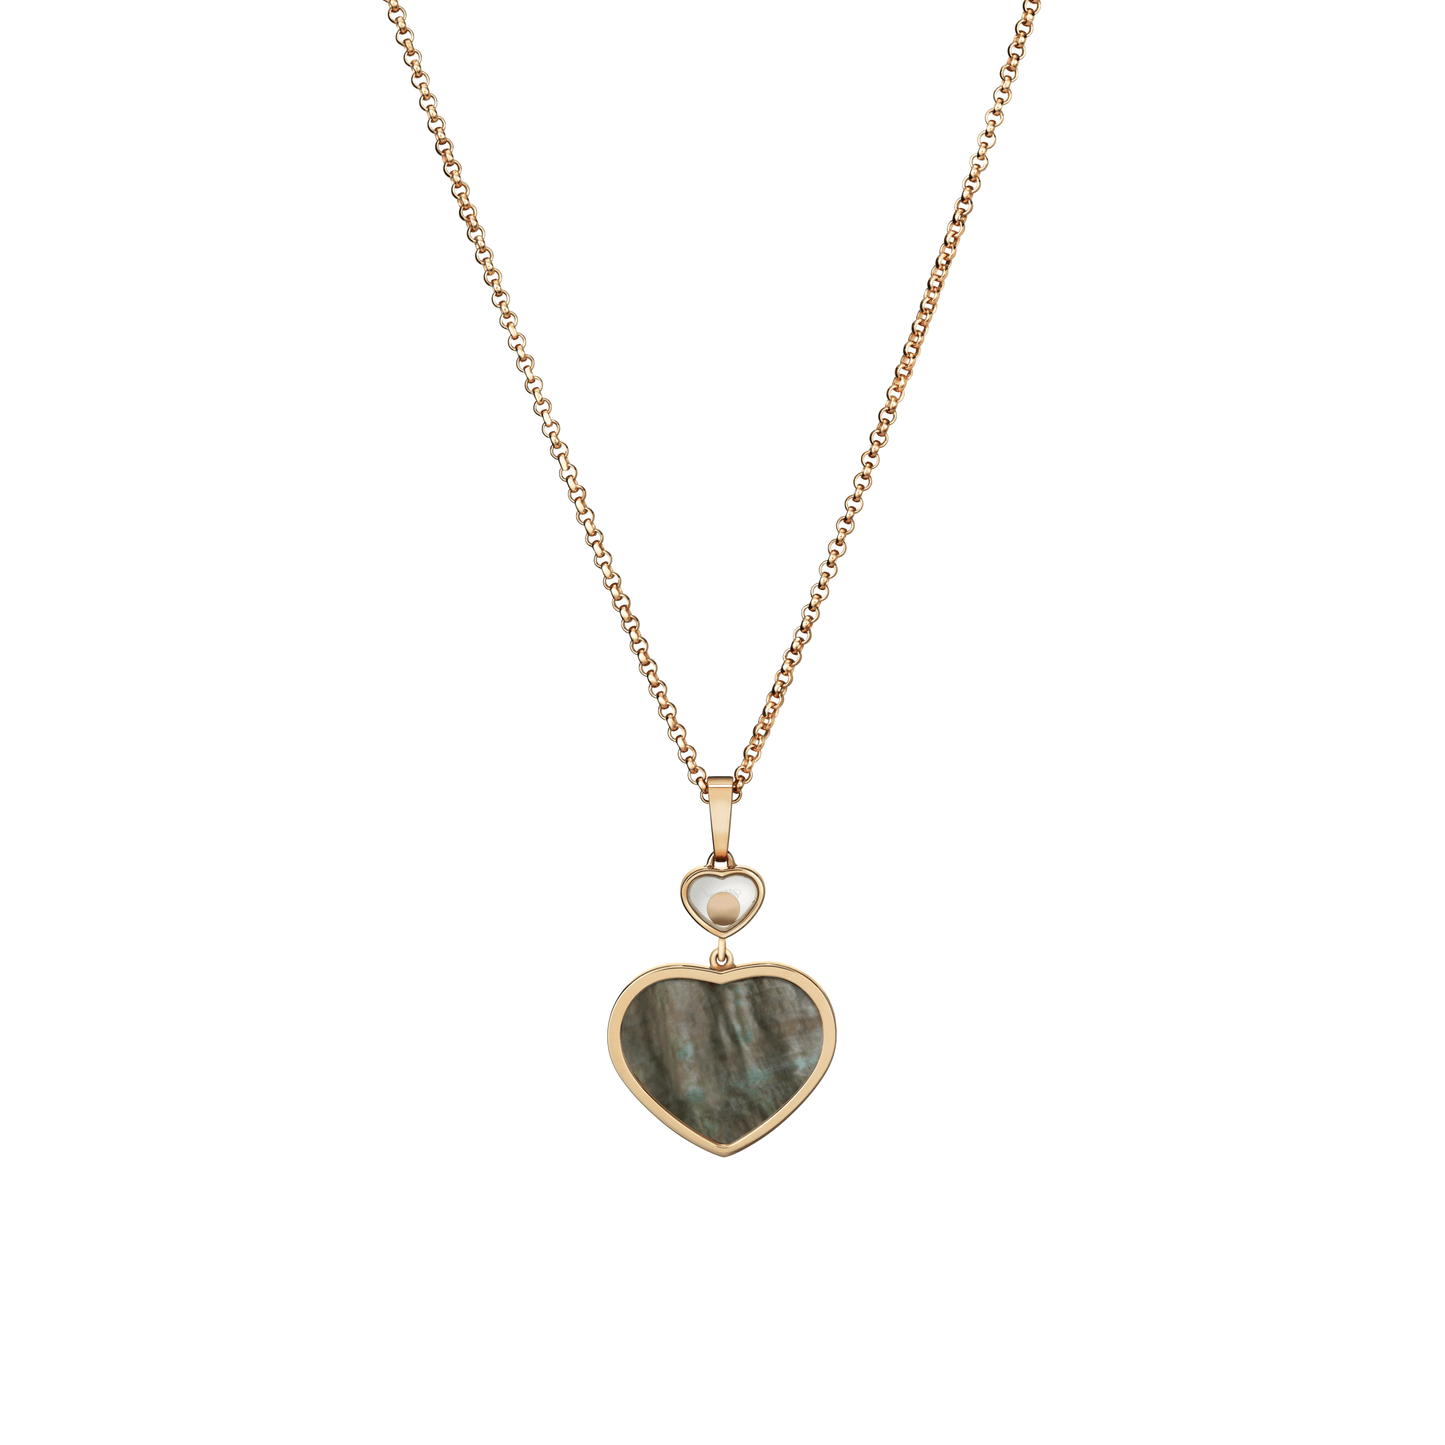 HAPPY HEARTS PENDANT, ETHICAL ROSE GOLD, DIAMOND, BLACK TAHITIAN MOTHER-OF-PEARL 797482-5304